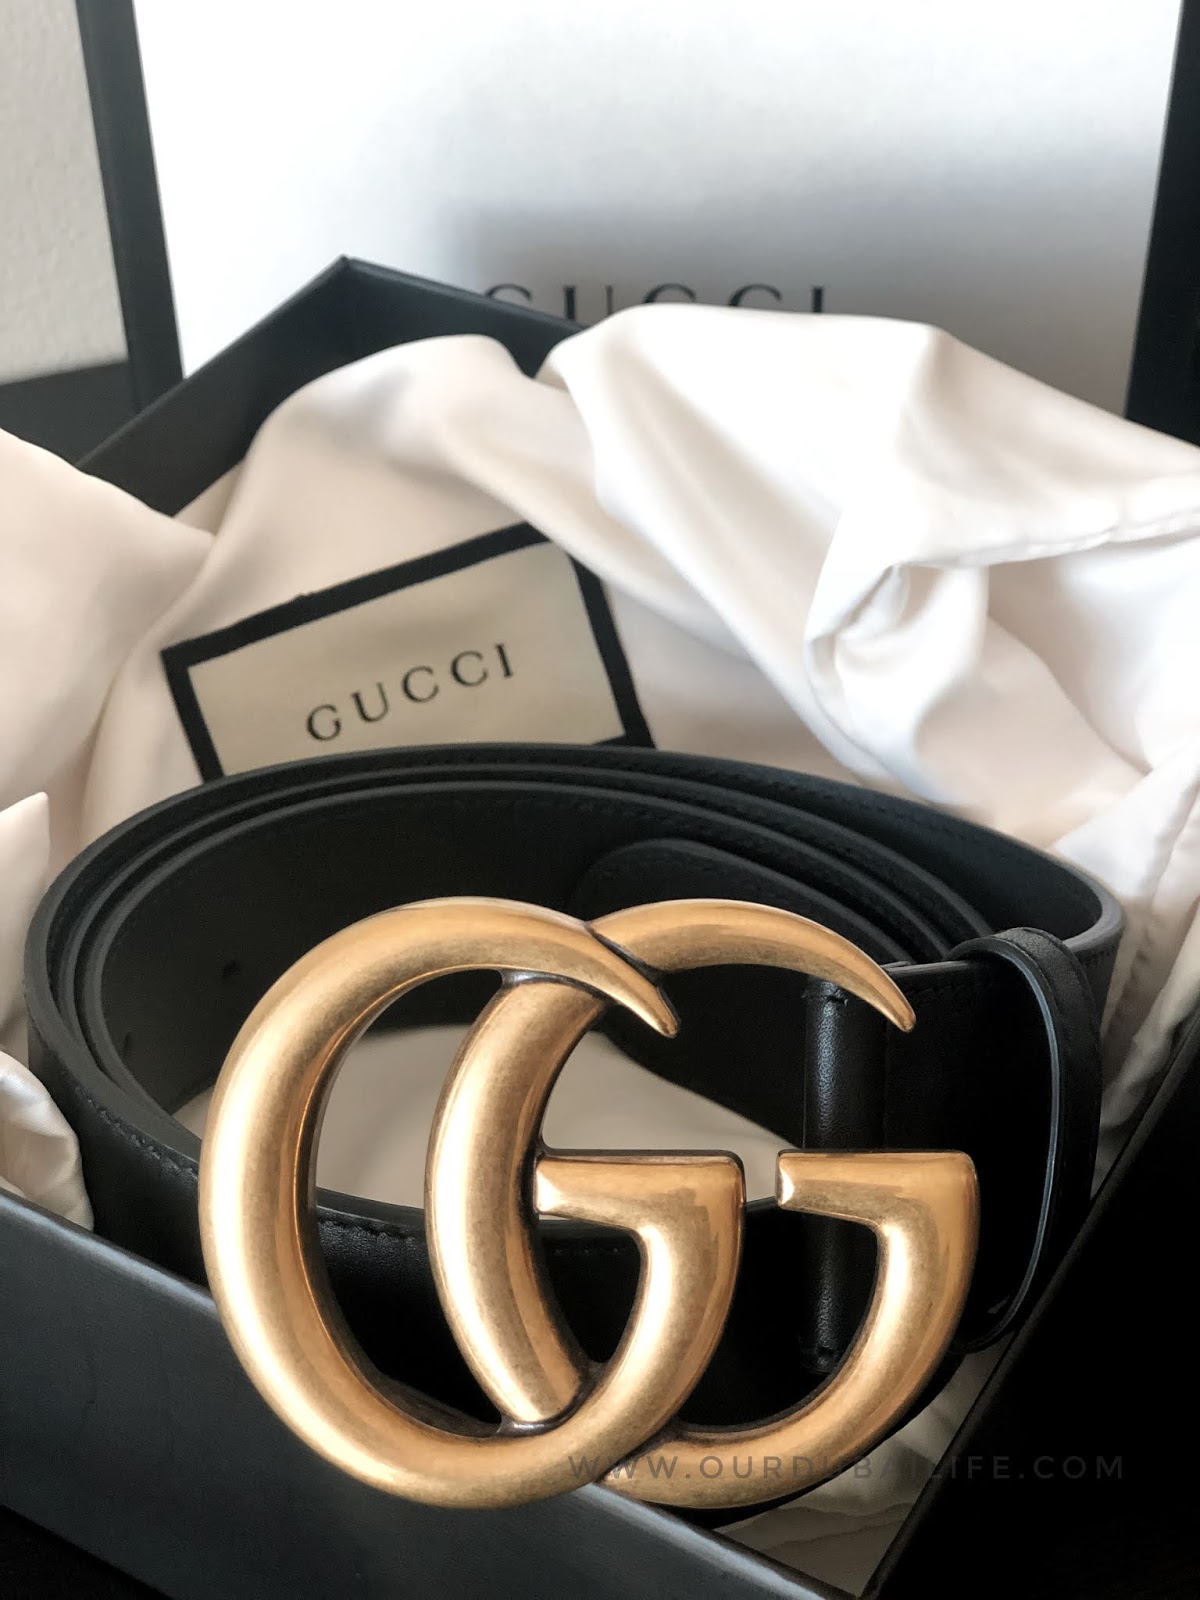 GUCCI Marmont Reveal | Special Birthday Haul | Our Dubai Life